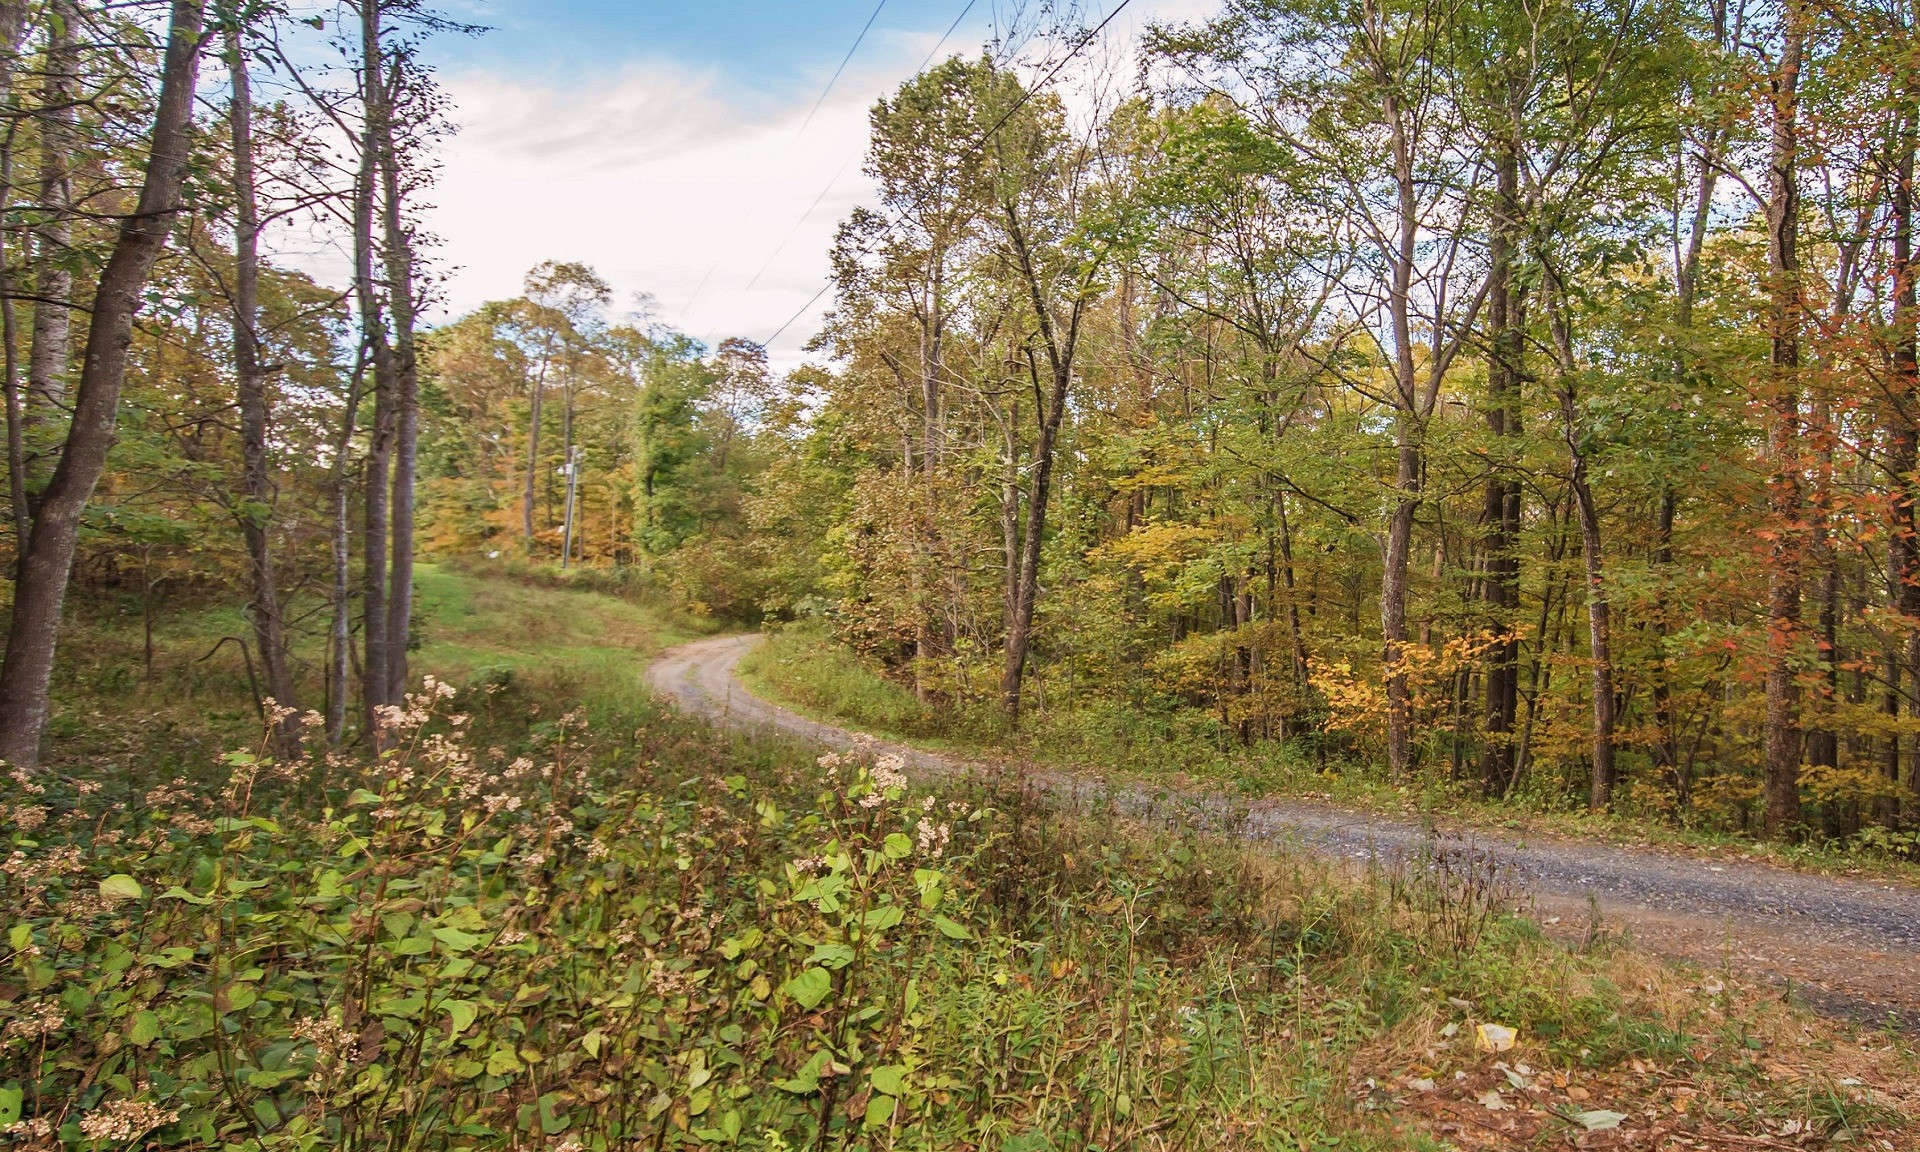 Located just two miles to Mount Jefferson State Park, this gorgeous 2.77 acre unrestricted small acreage land tract is accessed via a quiet graveled country road.